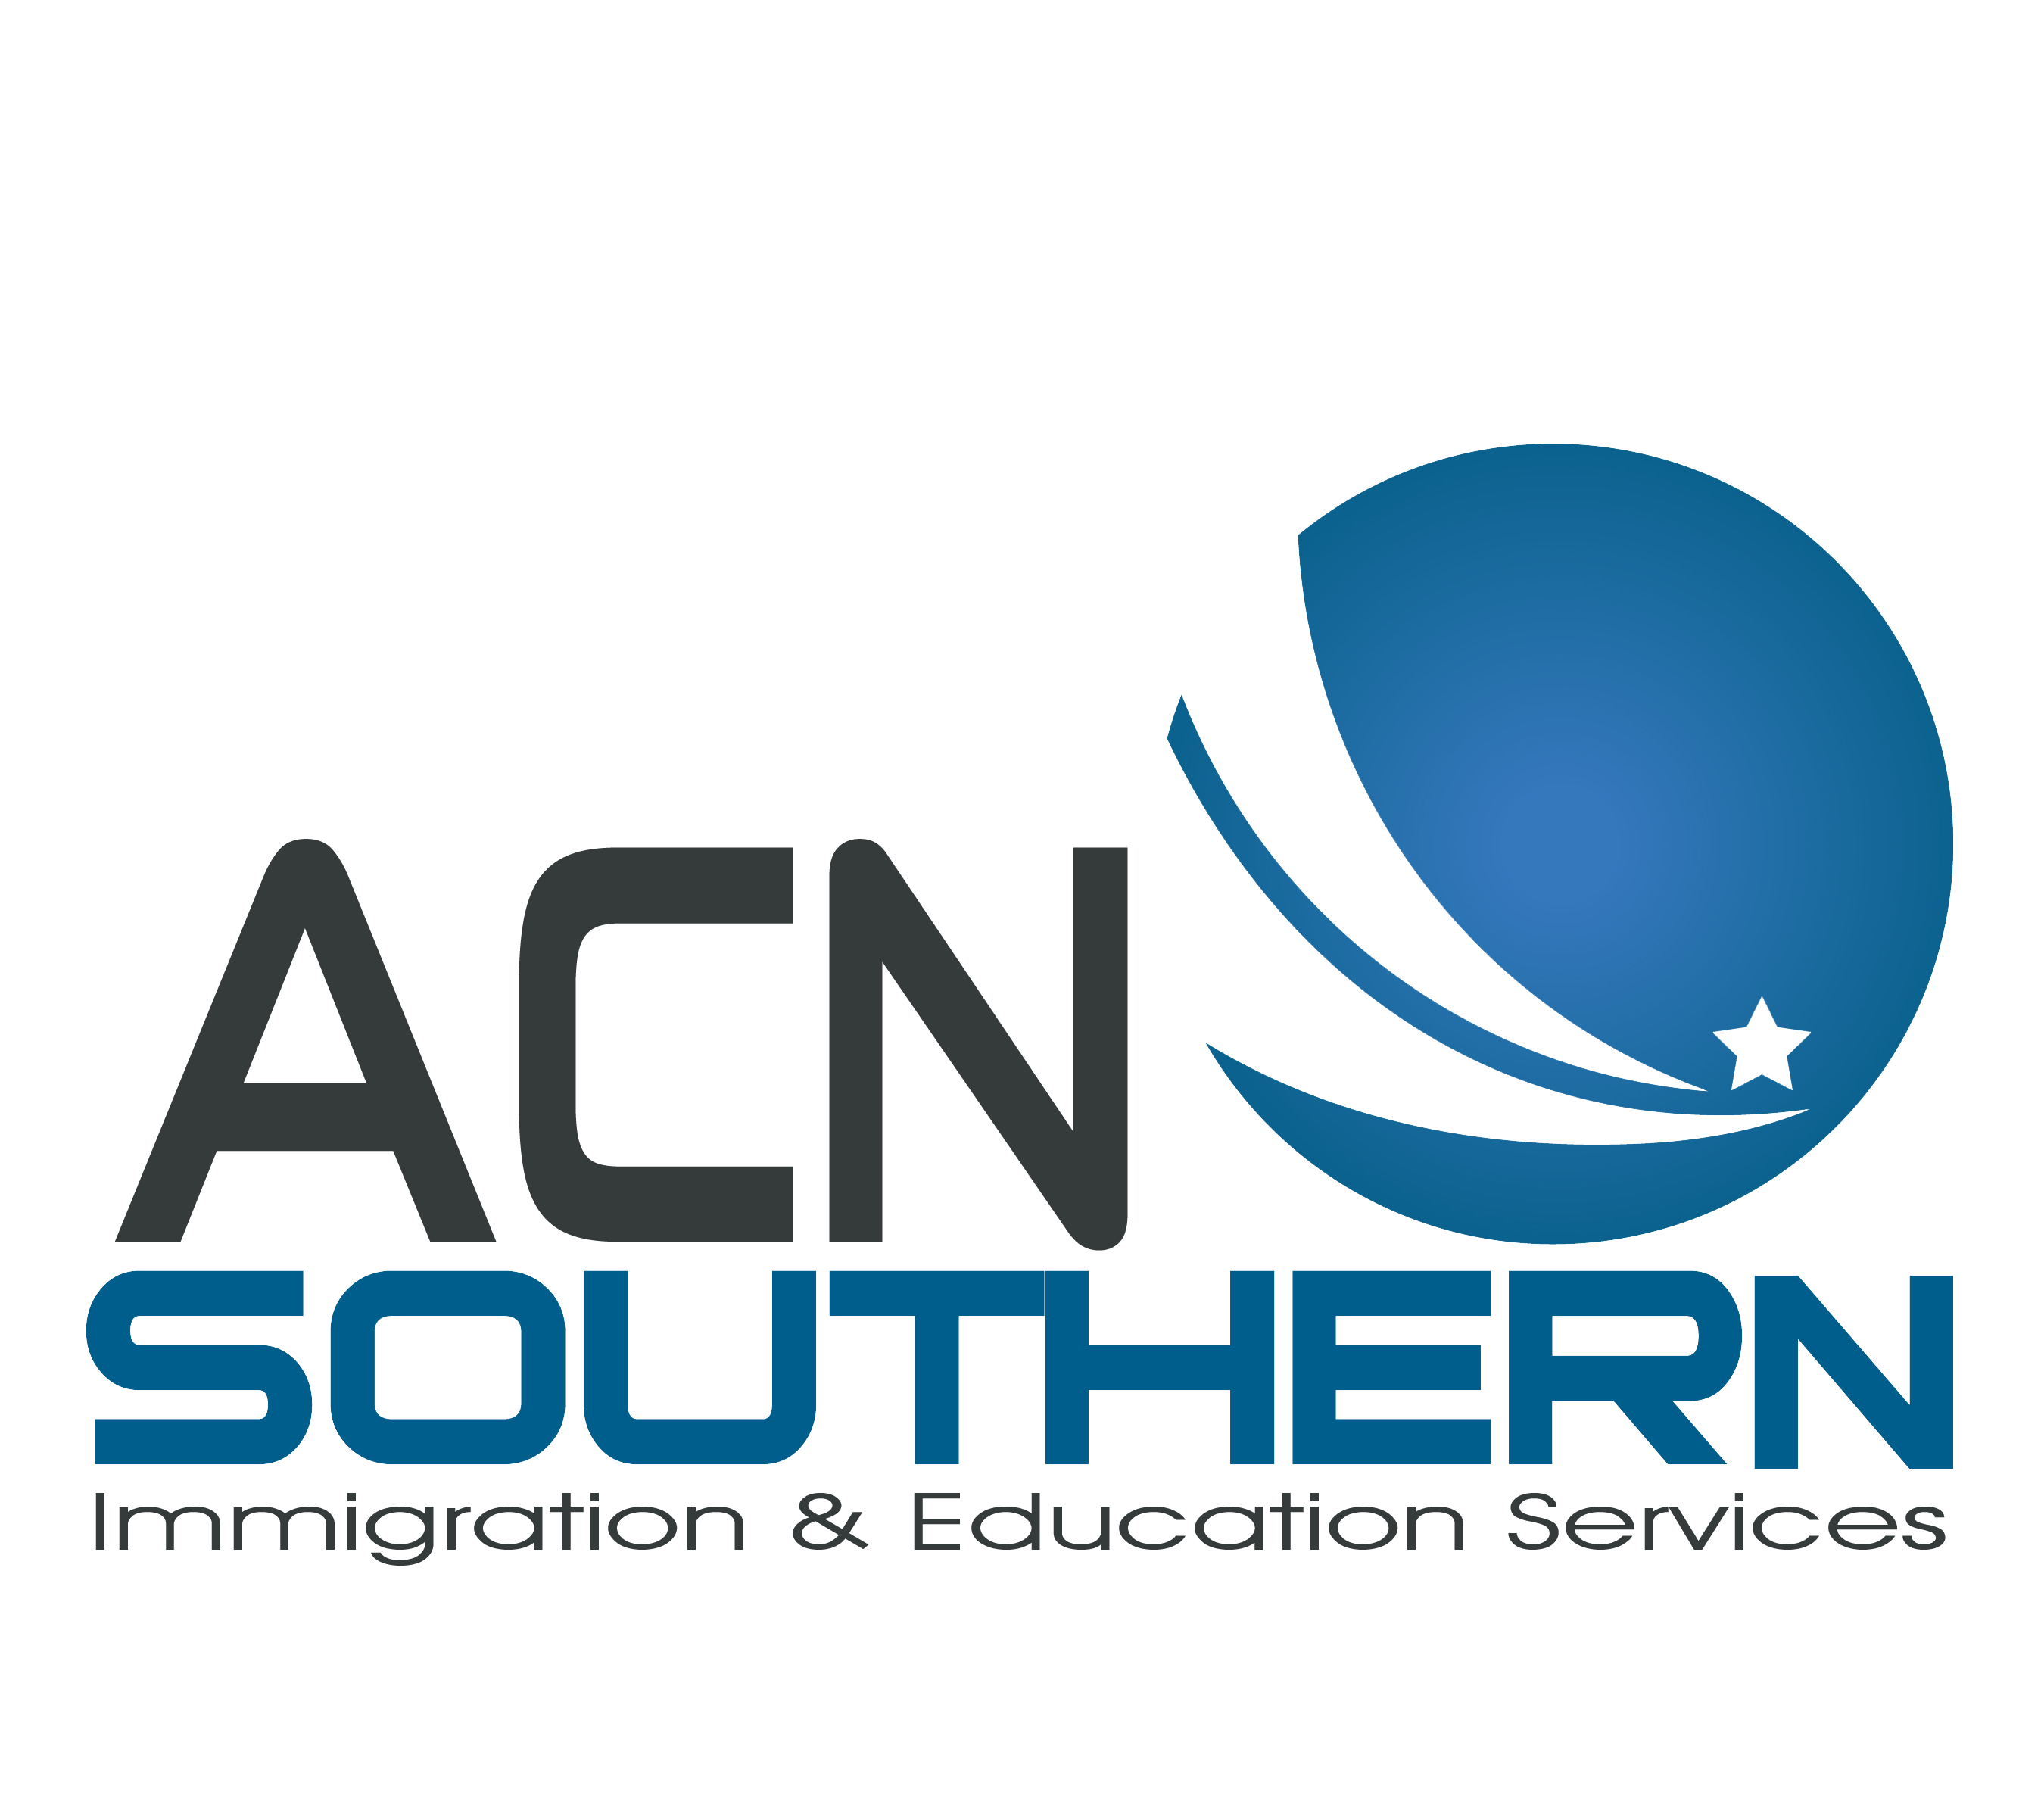 Acn Southern Immigration U0026 Education Services - Acn, Transparent background PNG HD thumbnail